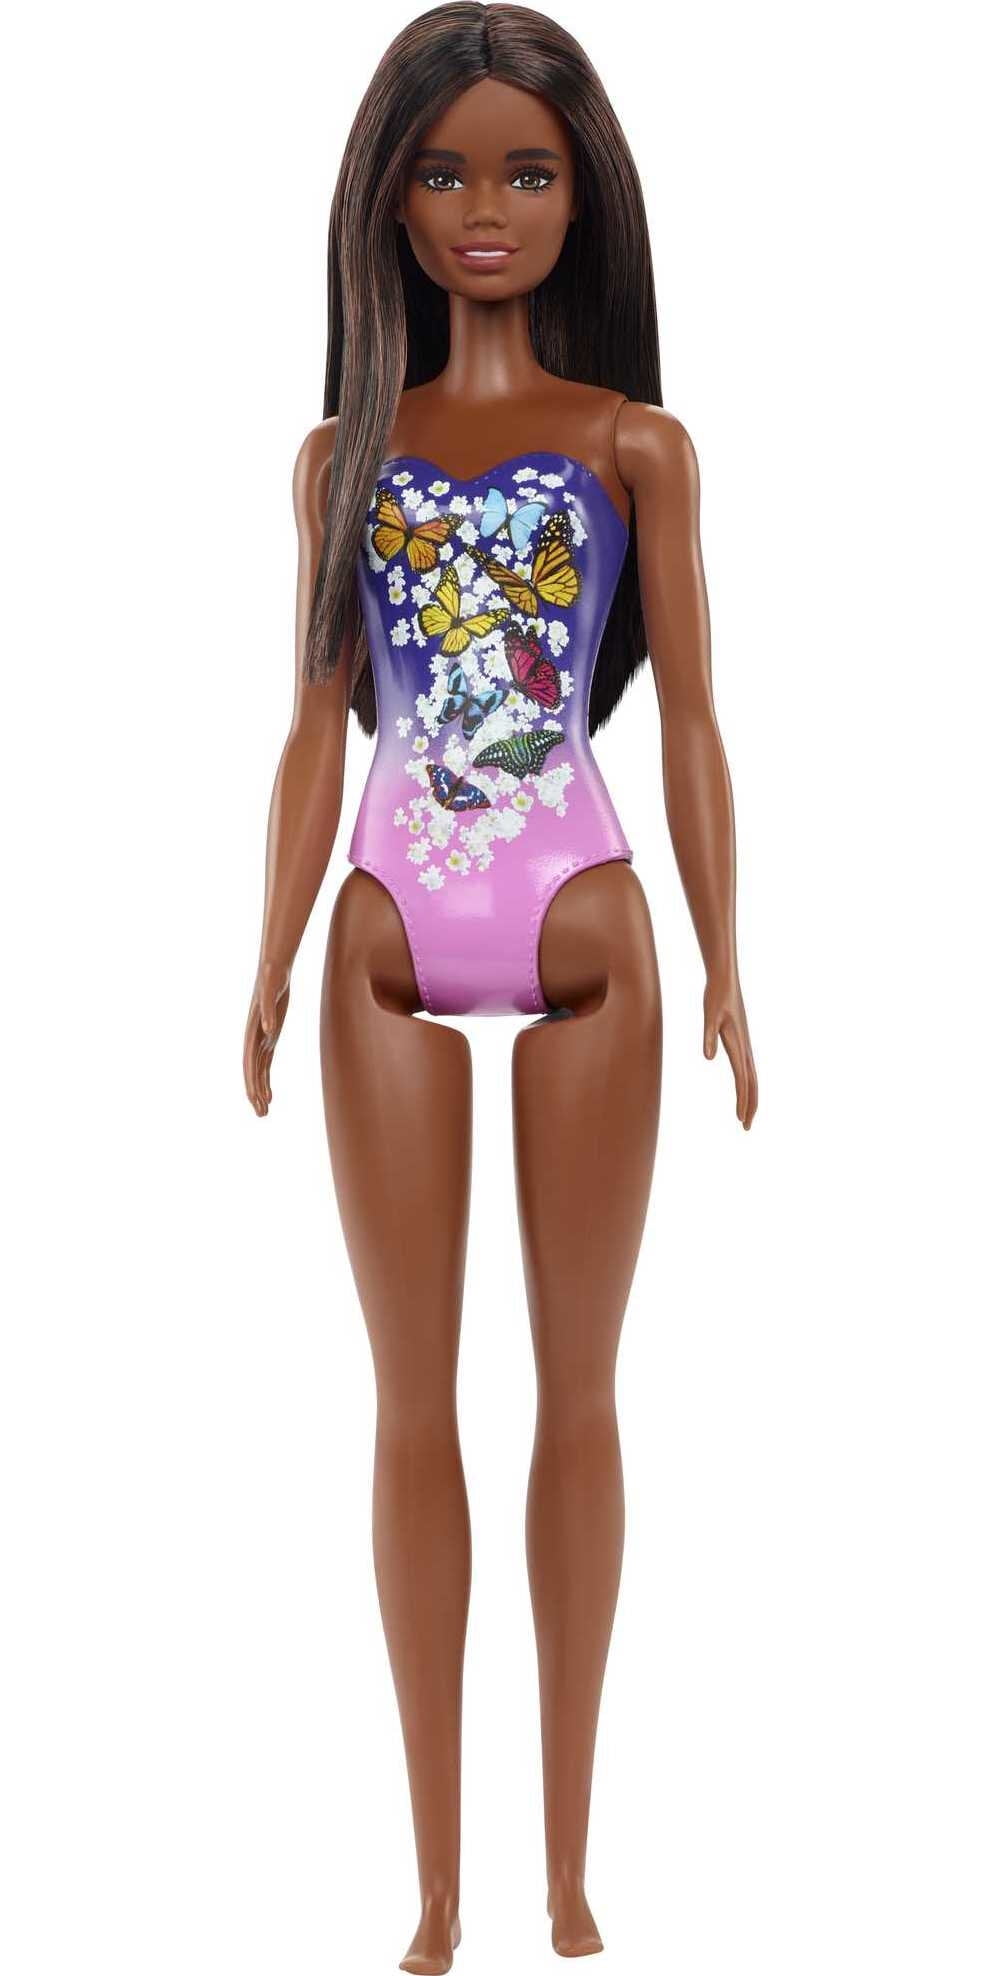 Barbie Beach Doll in Purple Butterfly Swimsuit with Straight Black Hair